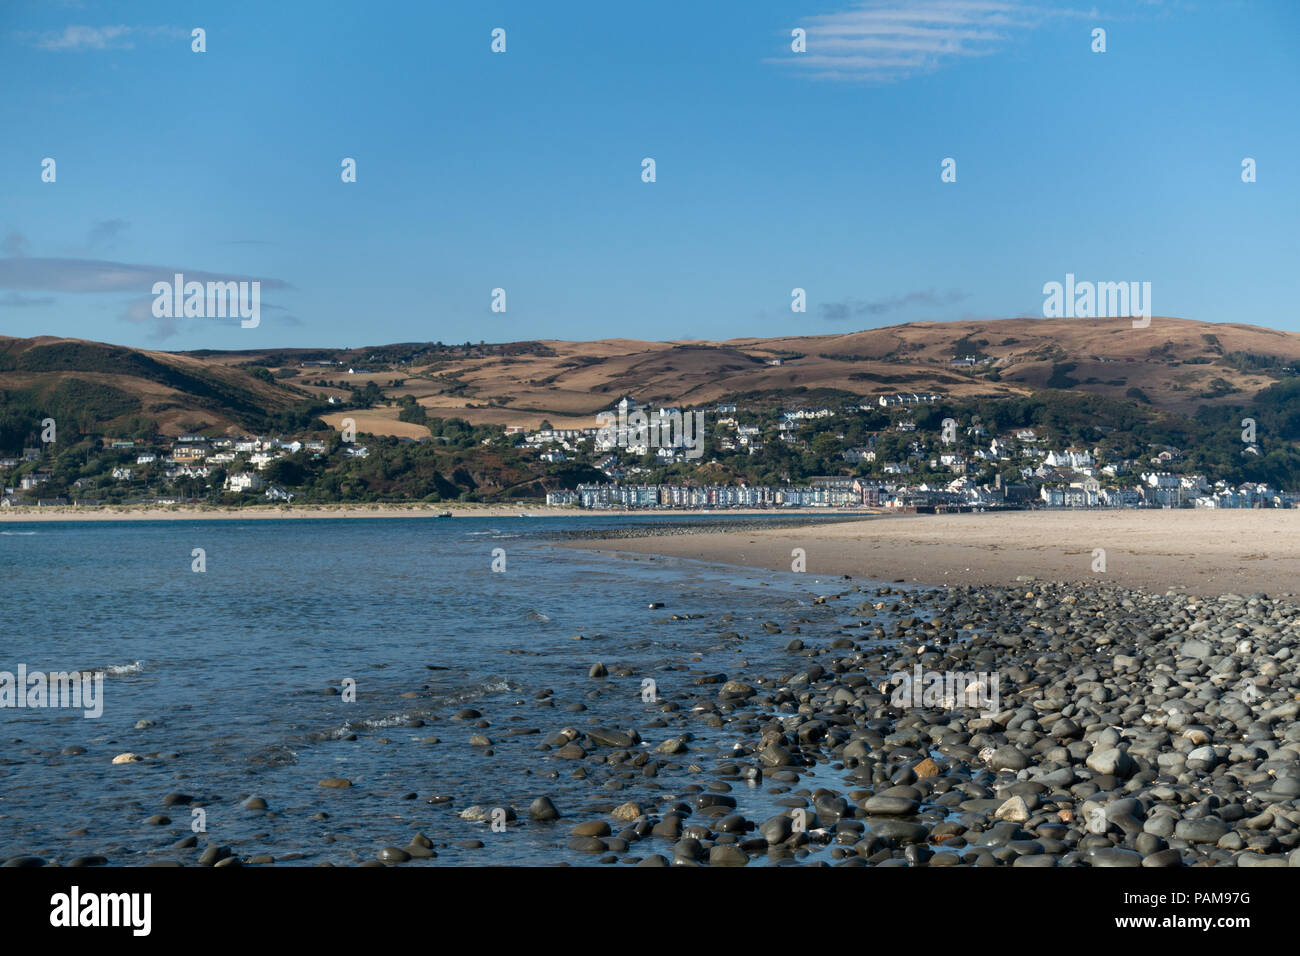 A distant view of Aberdyfi, taken during the dry summer of 2018, from the beach at Ynys-las nature reserve. Stock Photo